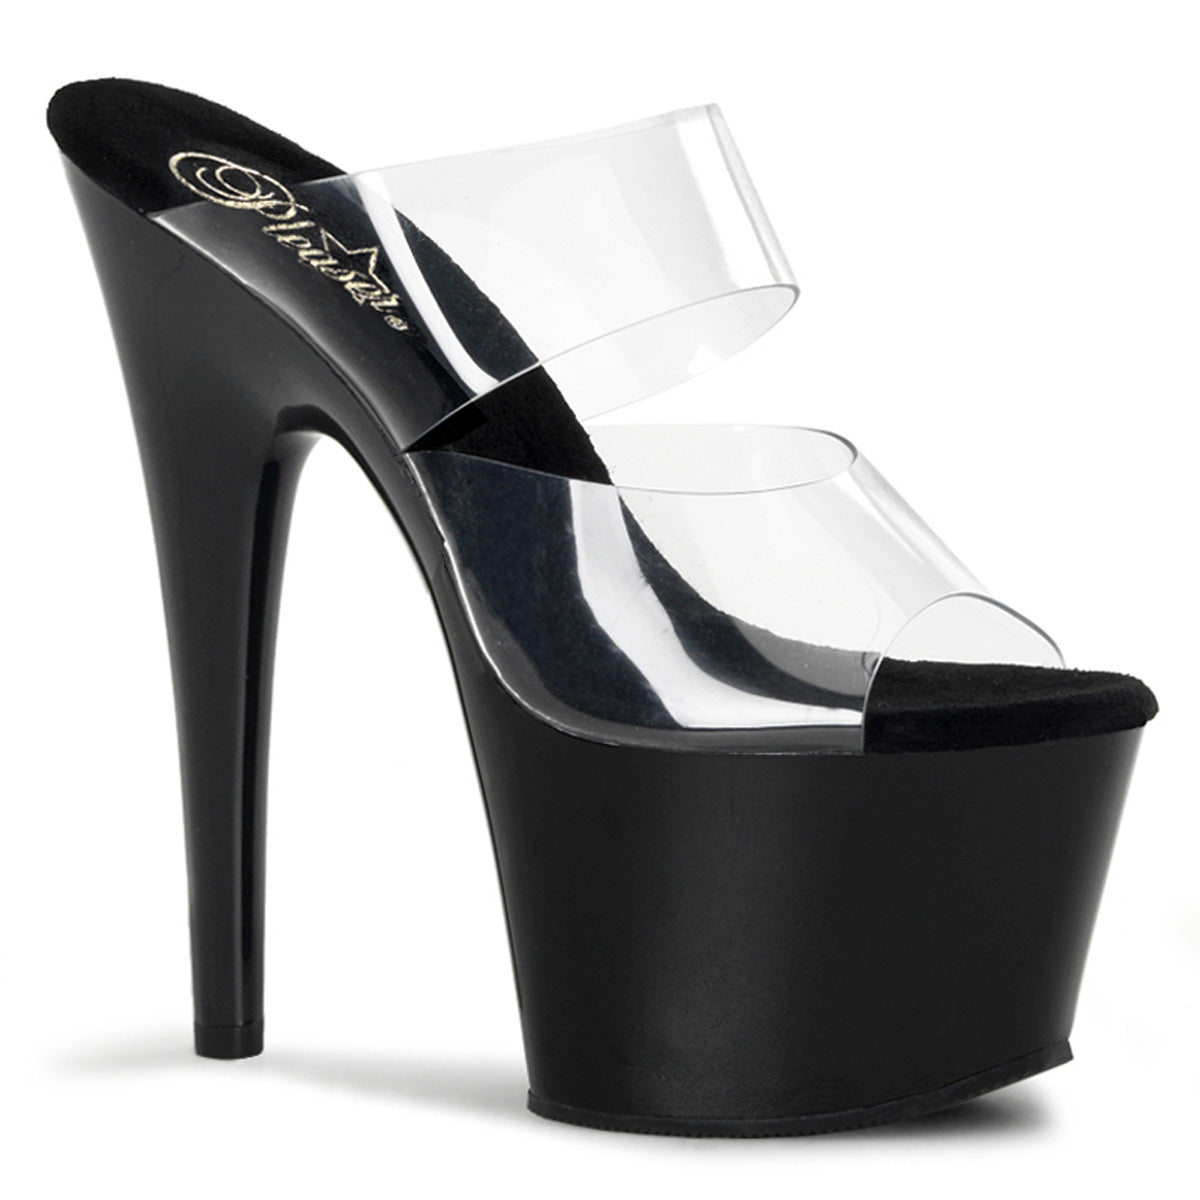 ADORE-702 7" Heel Clear and Black Strippers Platform Sandals-Pleaser- Sexy Shoes